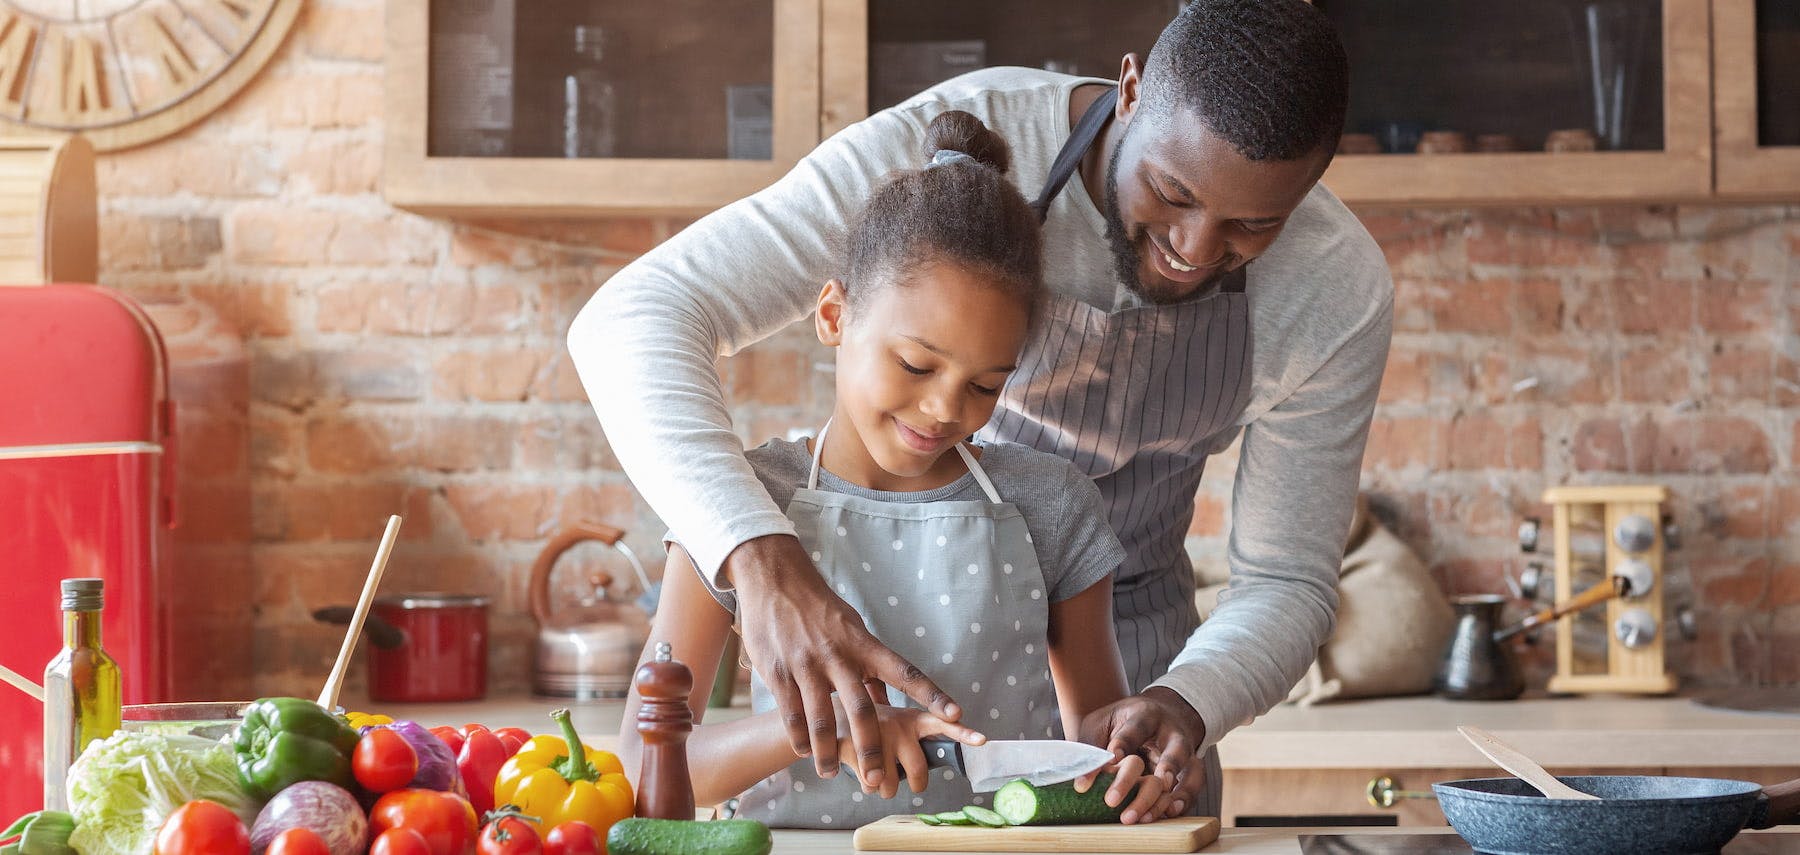 8 Ways to Stay Safe in the Kitchen